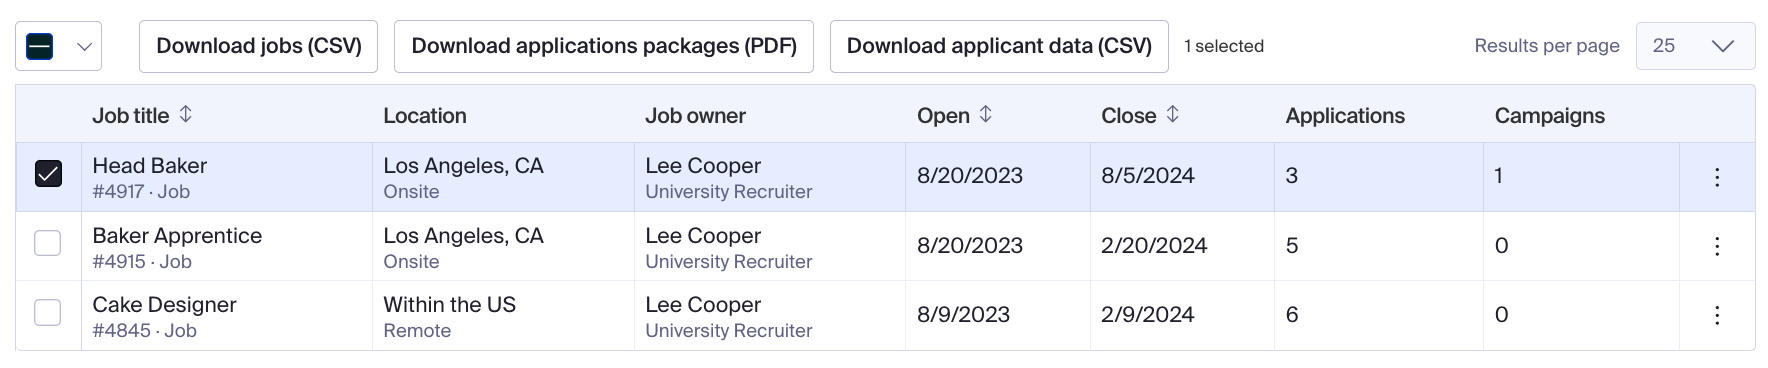 Download applicant packages .png